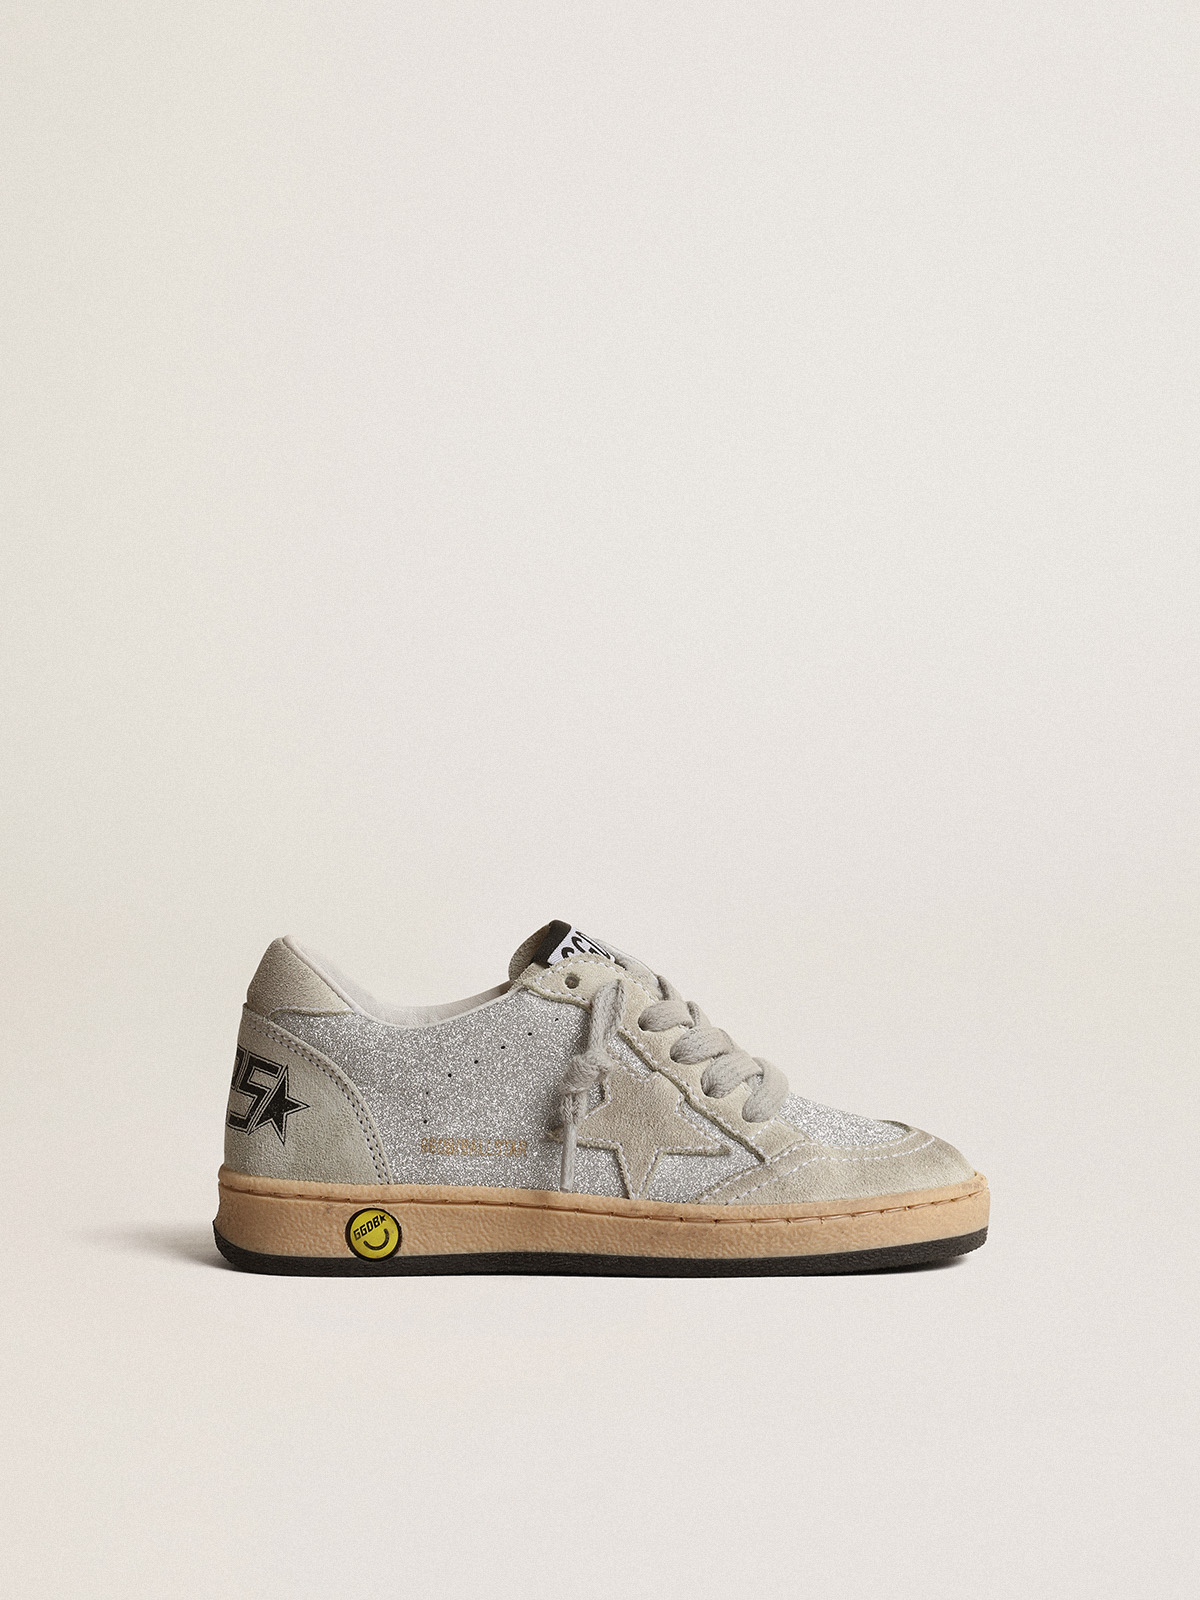 Ball Star Young in glitter with ice-gray suede inserts | Golden Goose